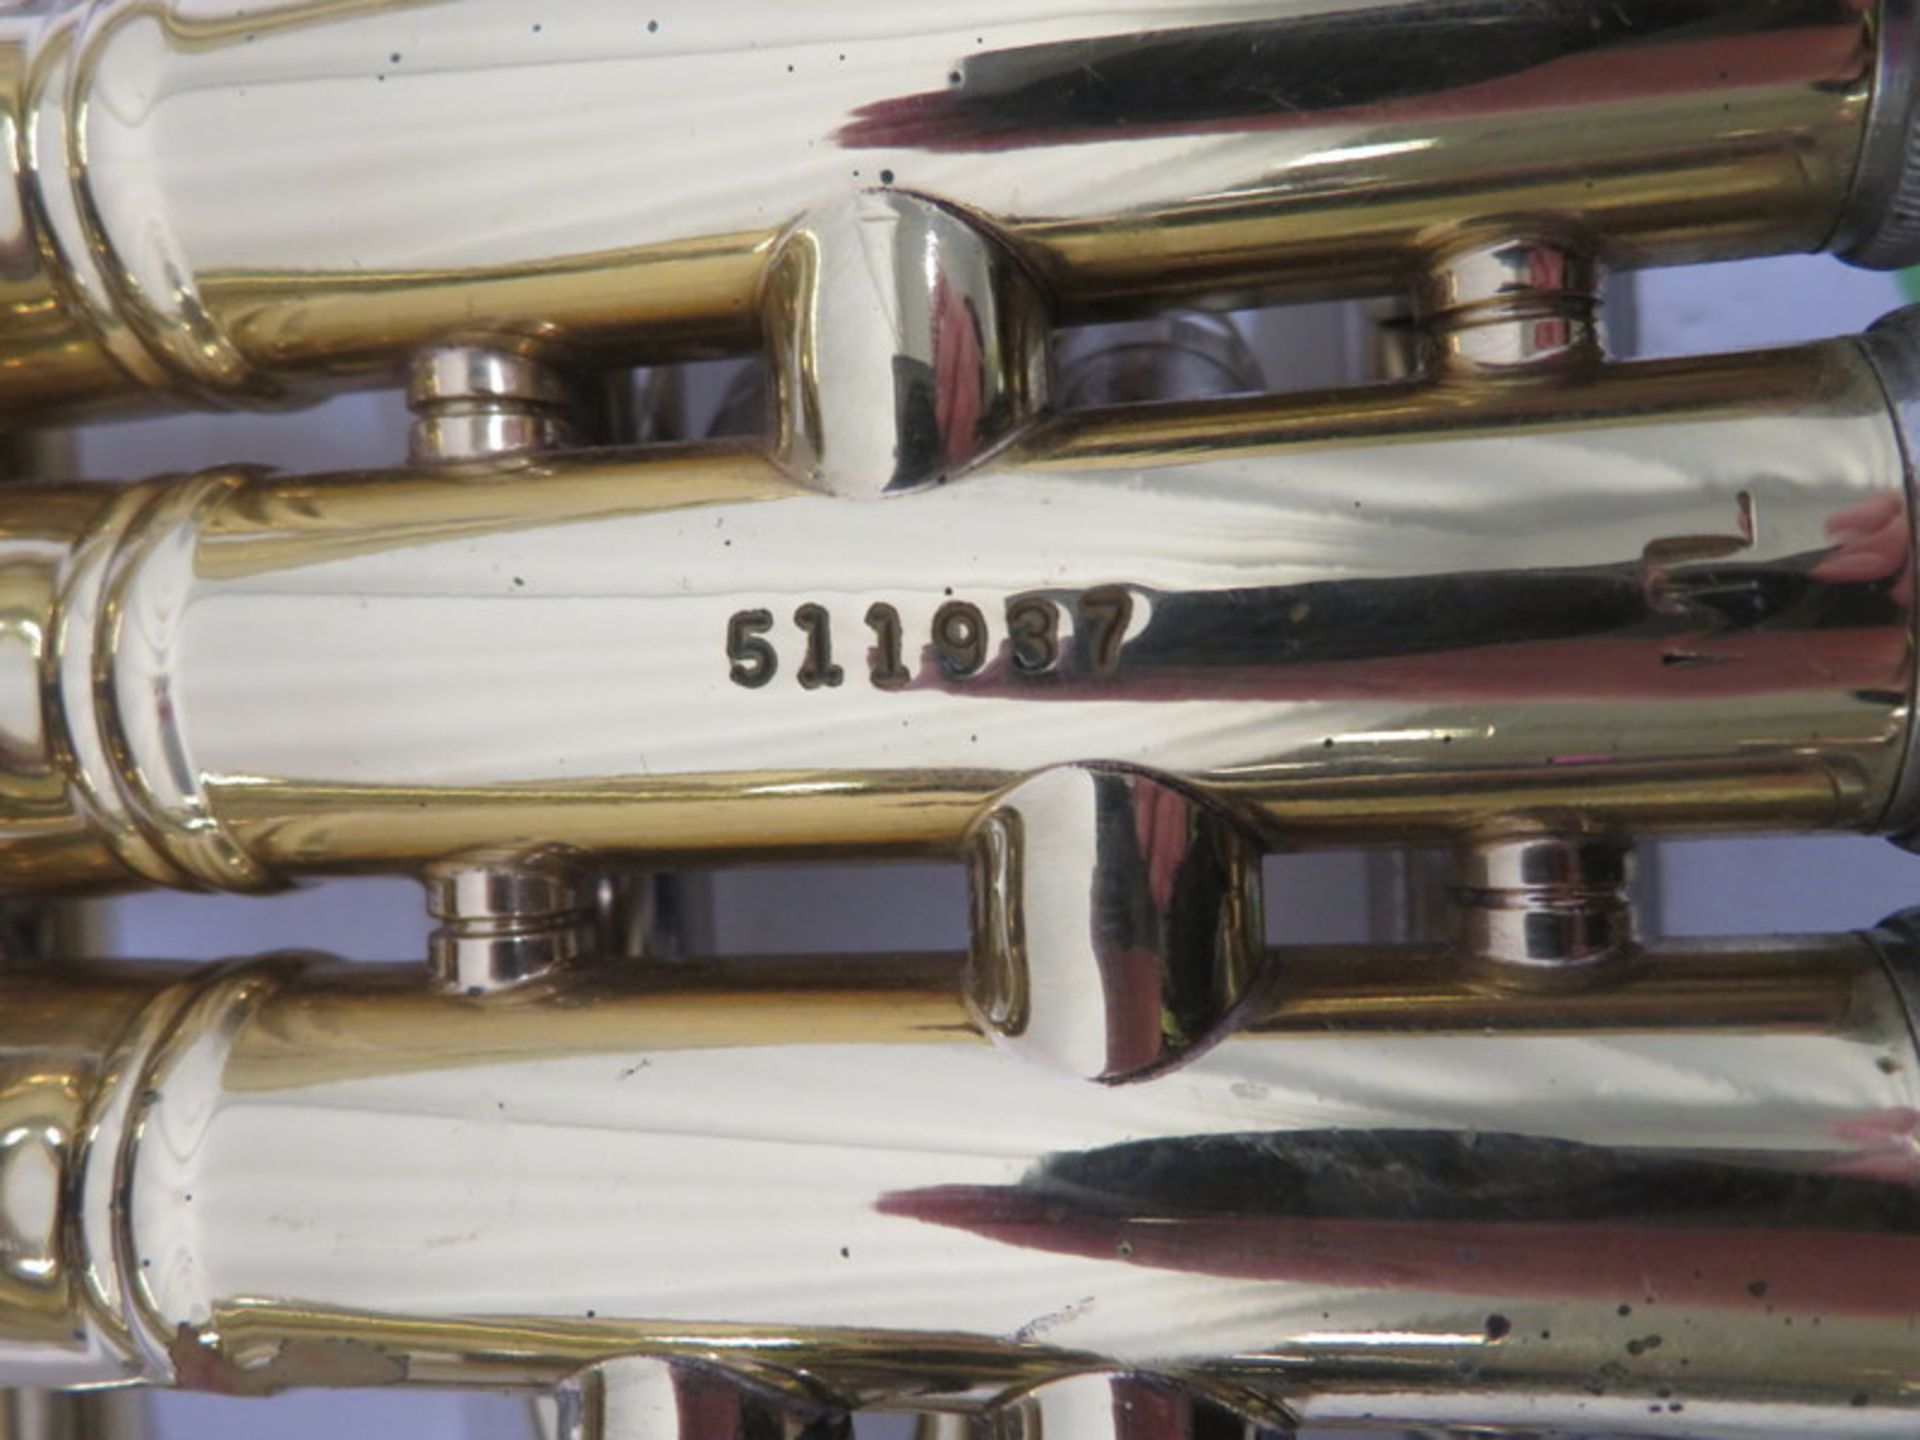 Bach Stradivarius 184 Cornet With Case. Serial Number: 511937. Please Note That This Item - Image 15 of 17